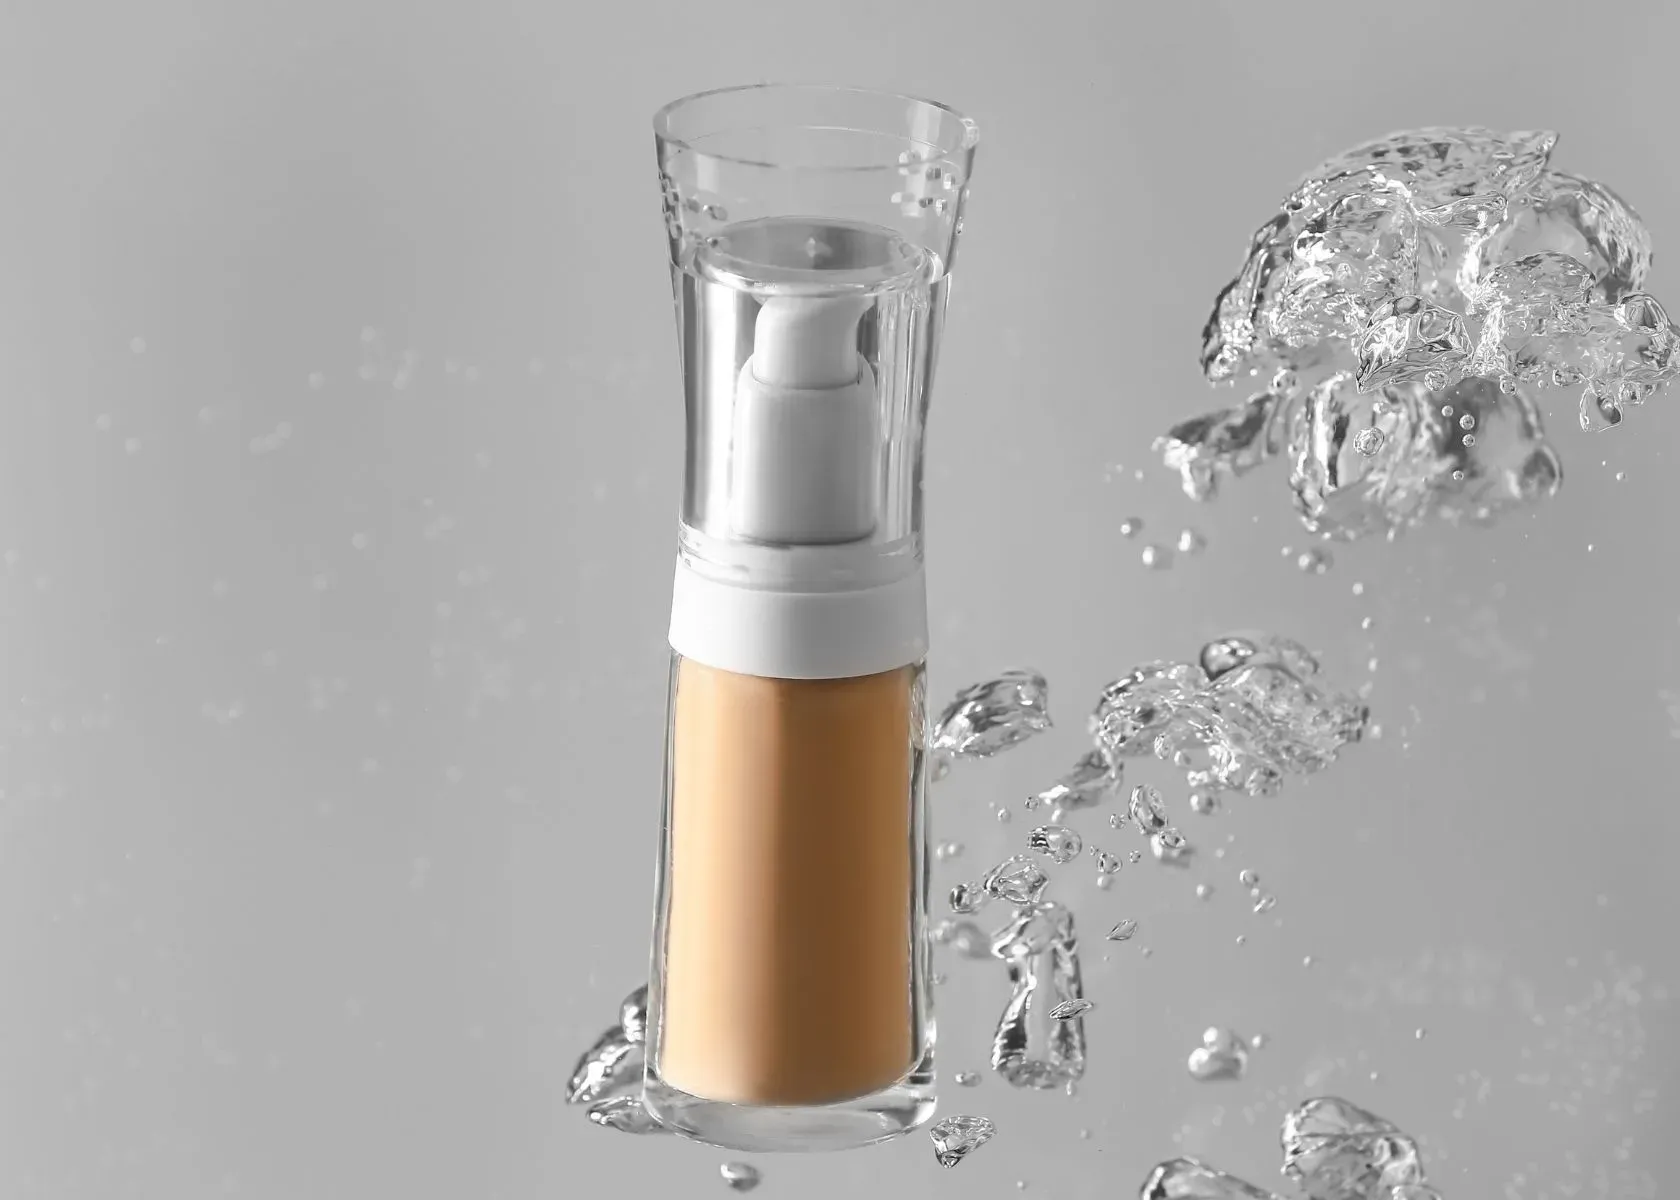 Who Should Use Water Based Foundation?